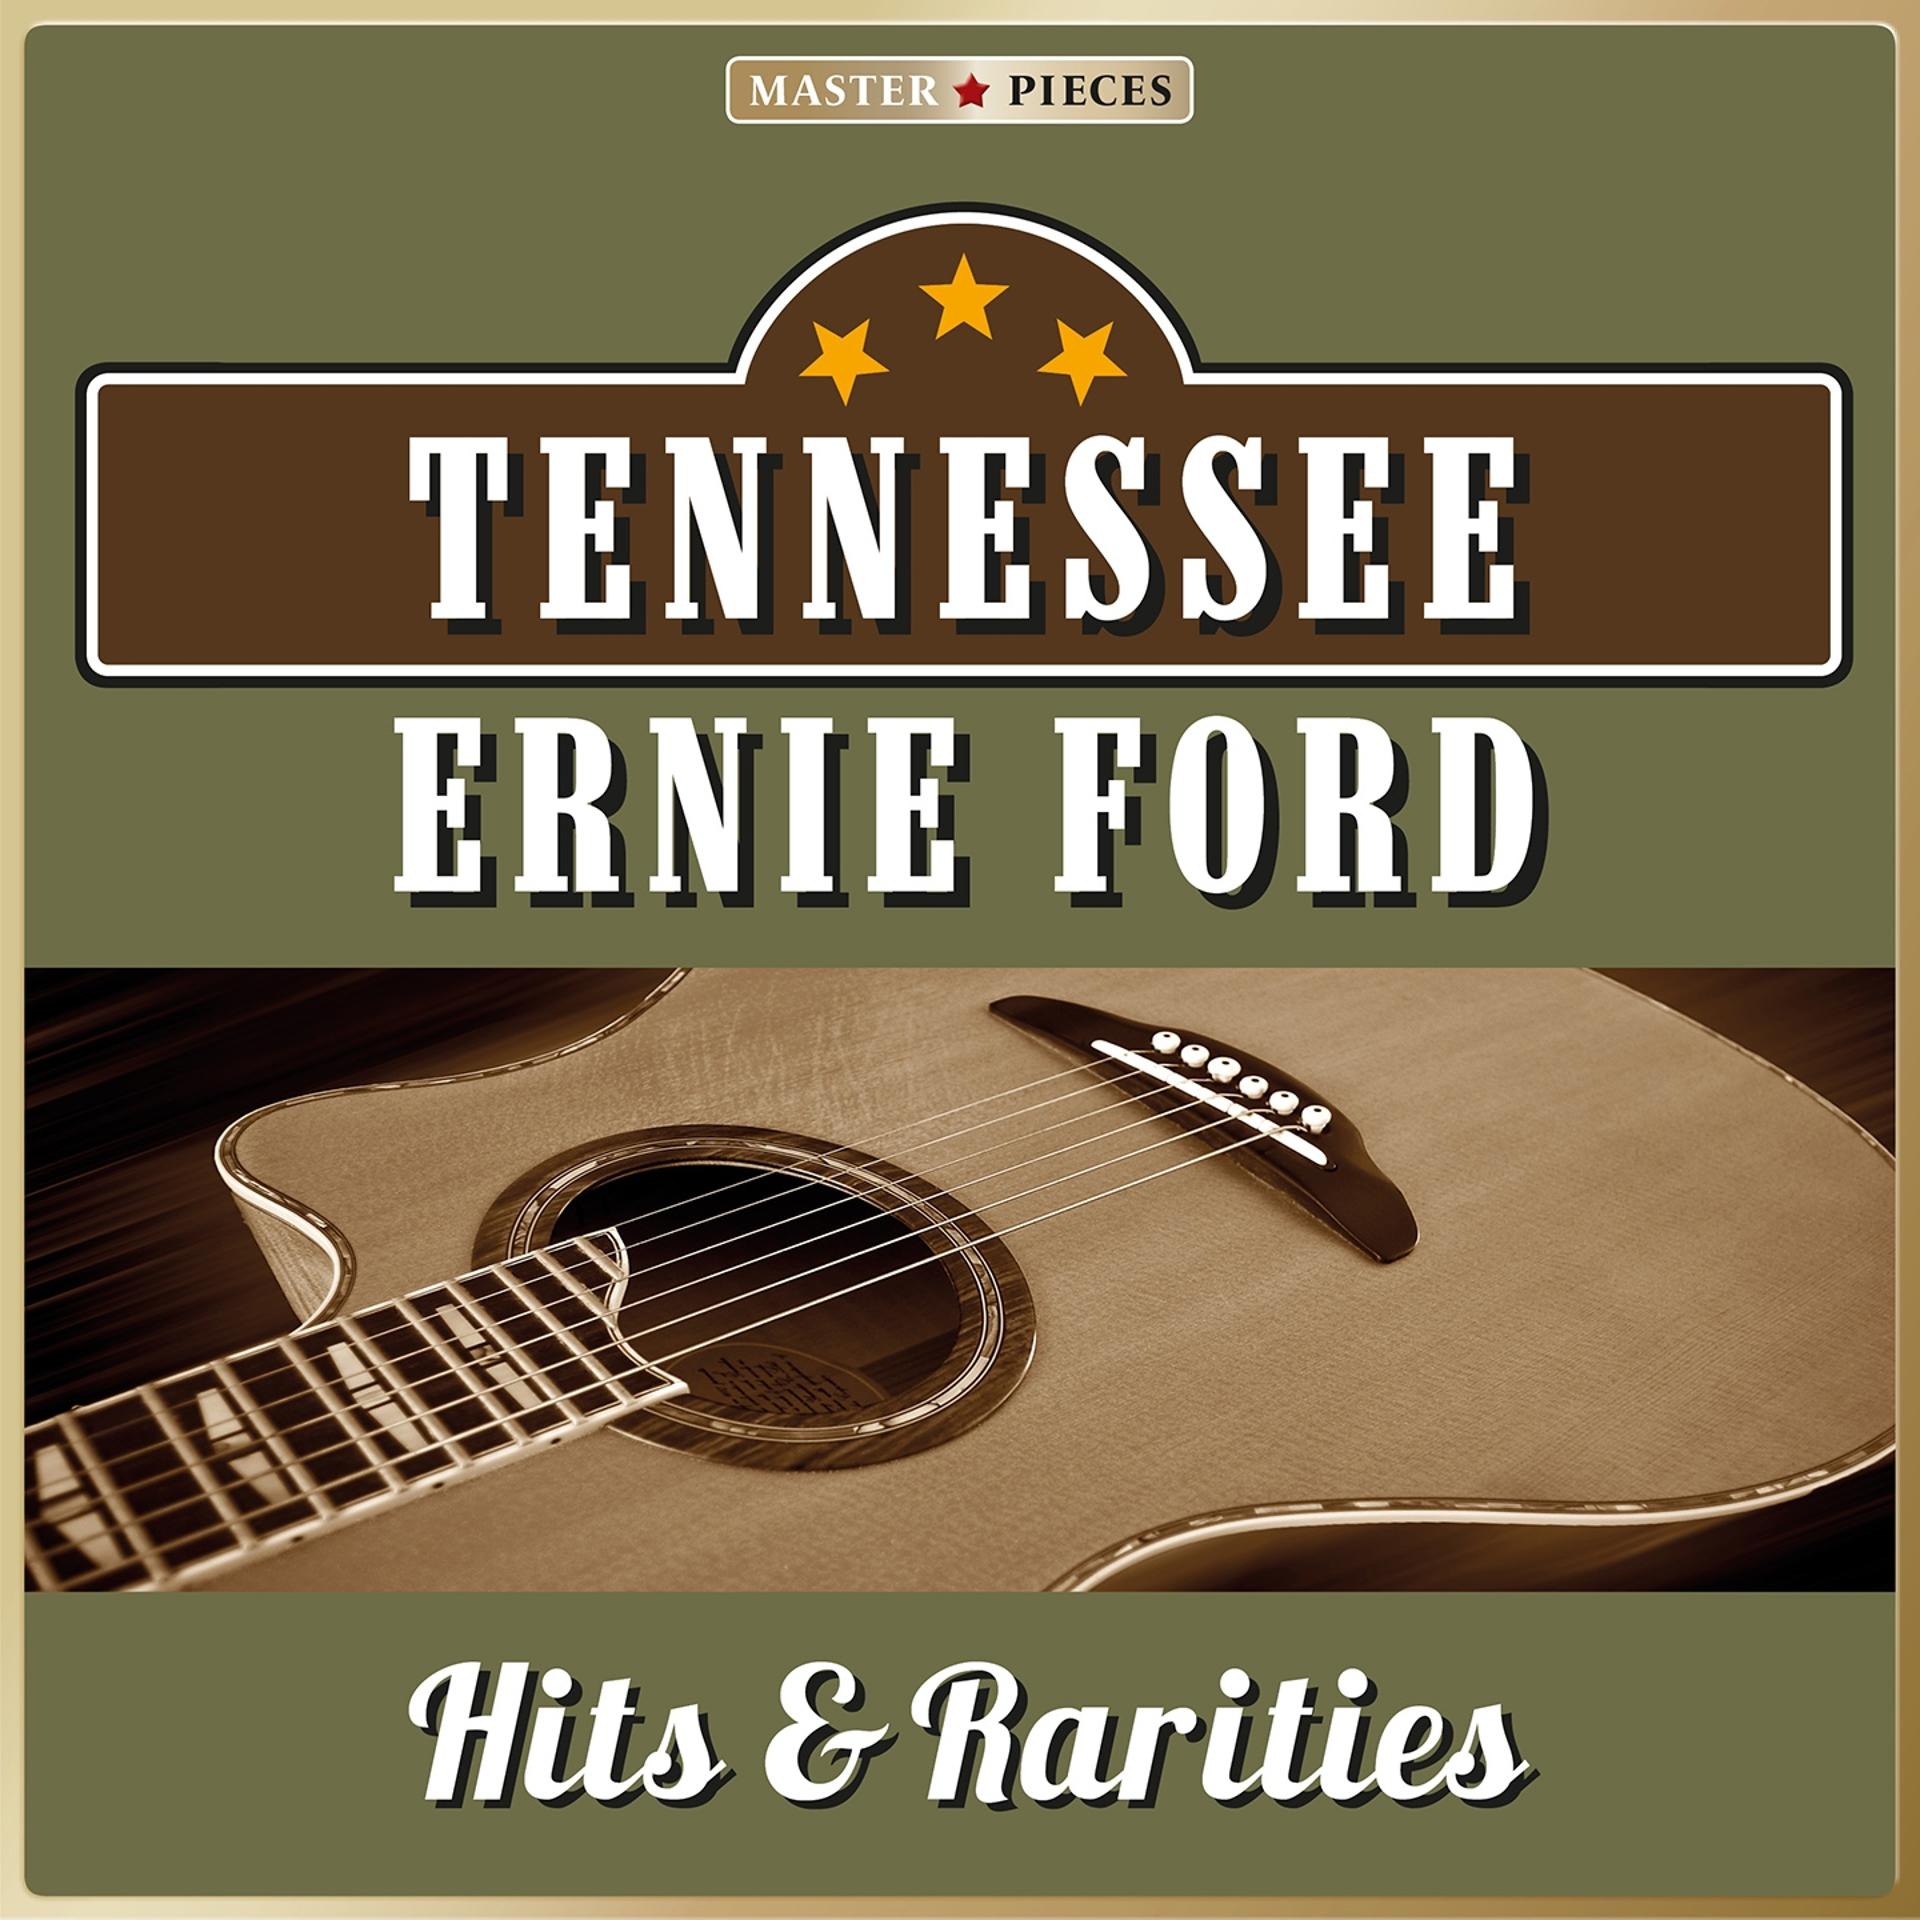 Постер альбома Masterpieces Presents Tennessee Ernie Ford, Hits & Rarities (45 Country Songs)